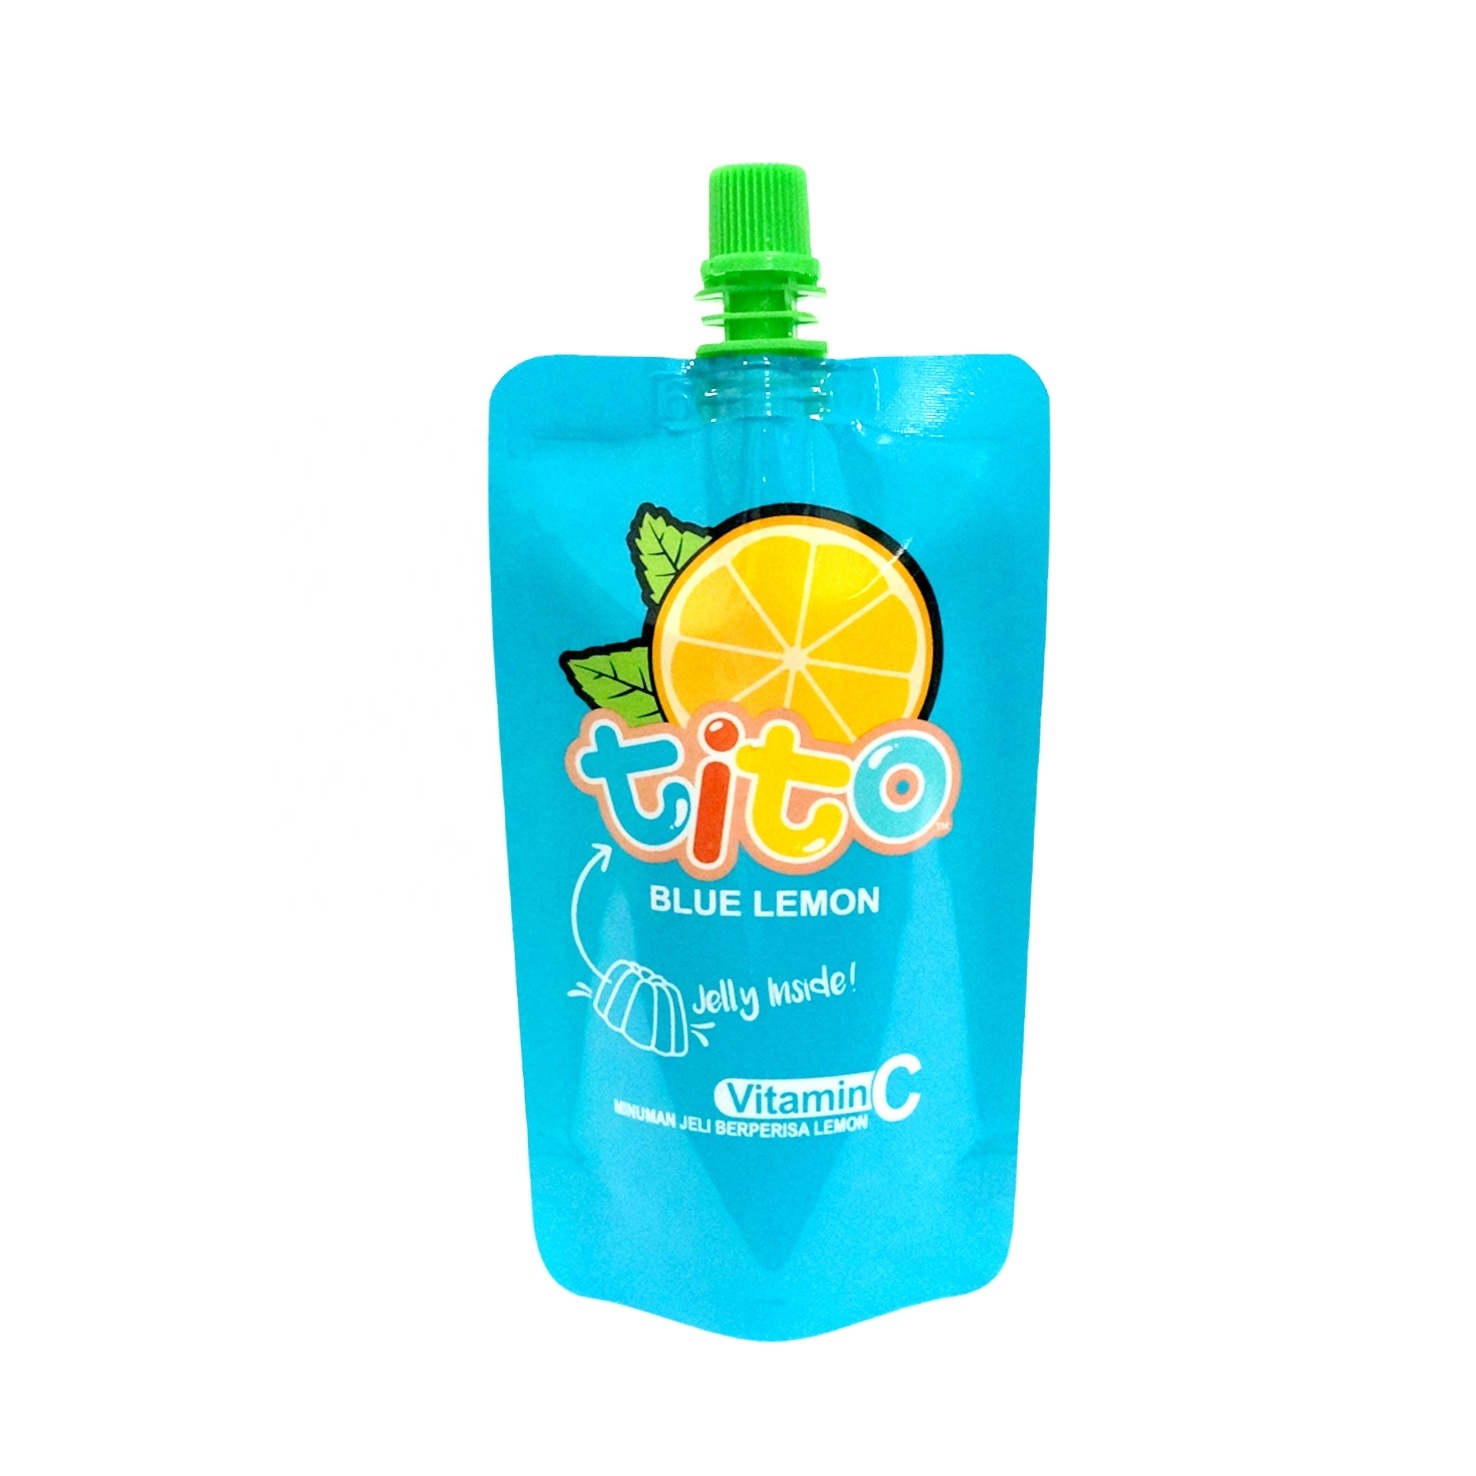 DQ PACK flexible factory bags other packaging materials water big capacity stand up spout pouch plastic bag